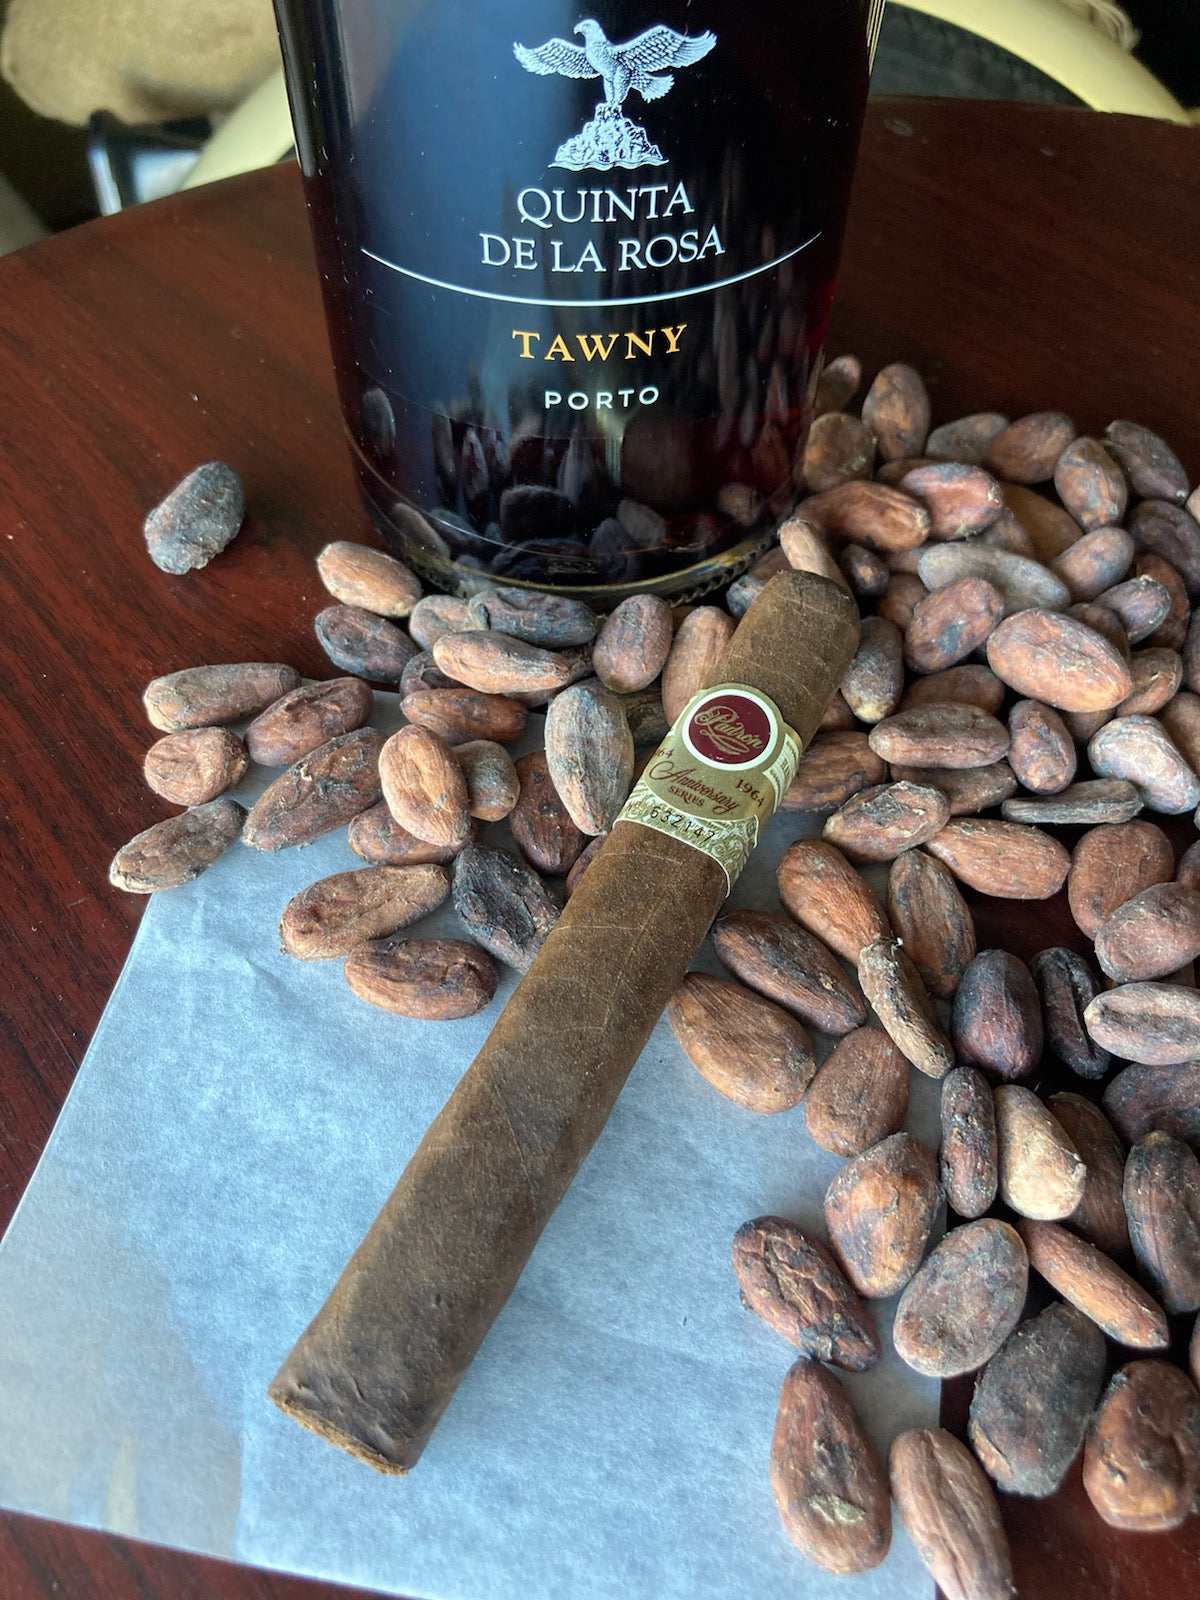 What?! A Cigar and Port Wine...in a chocolate?!